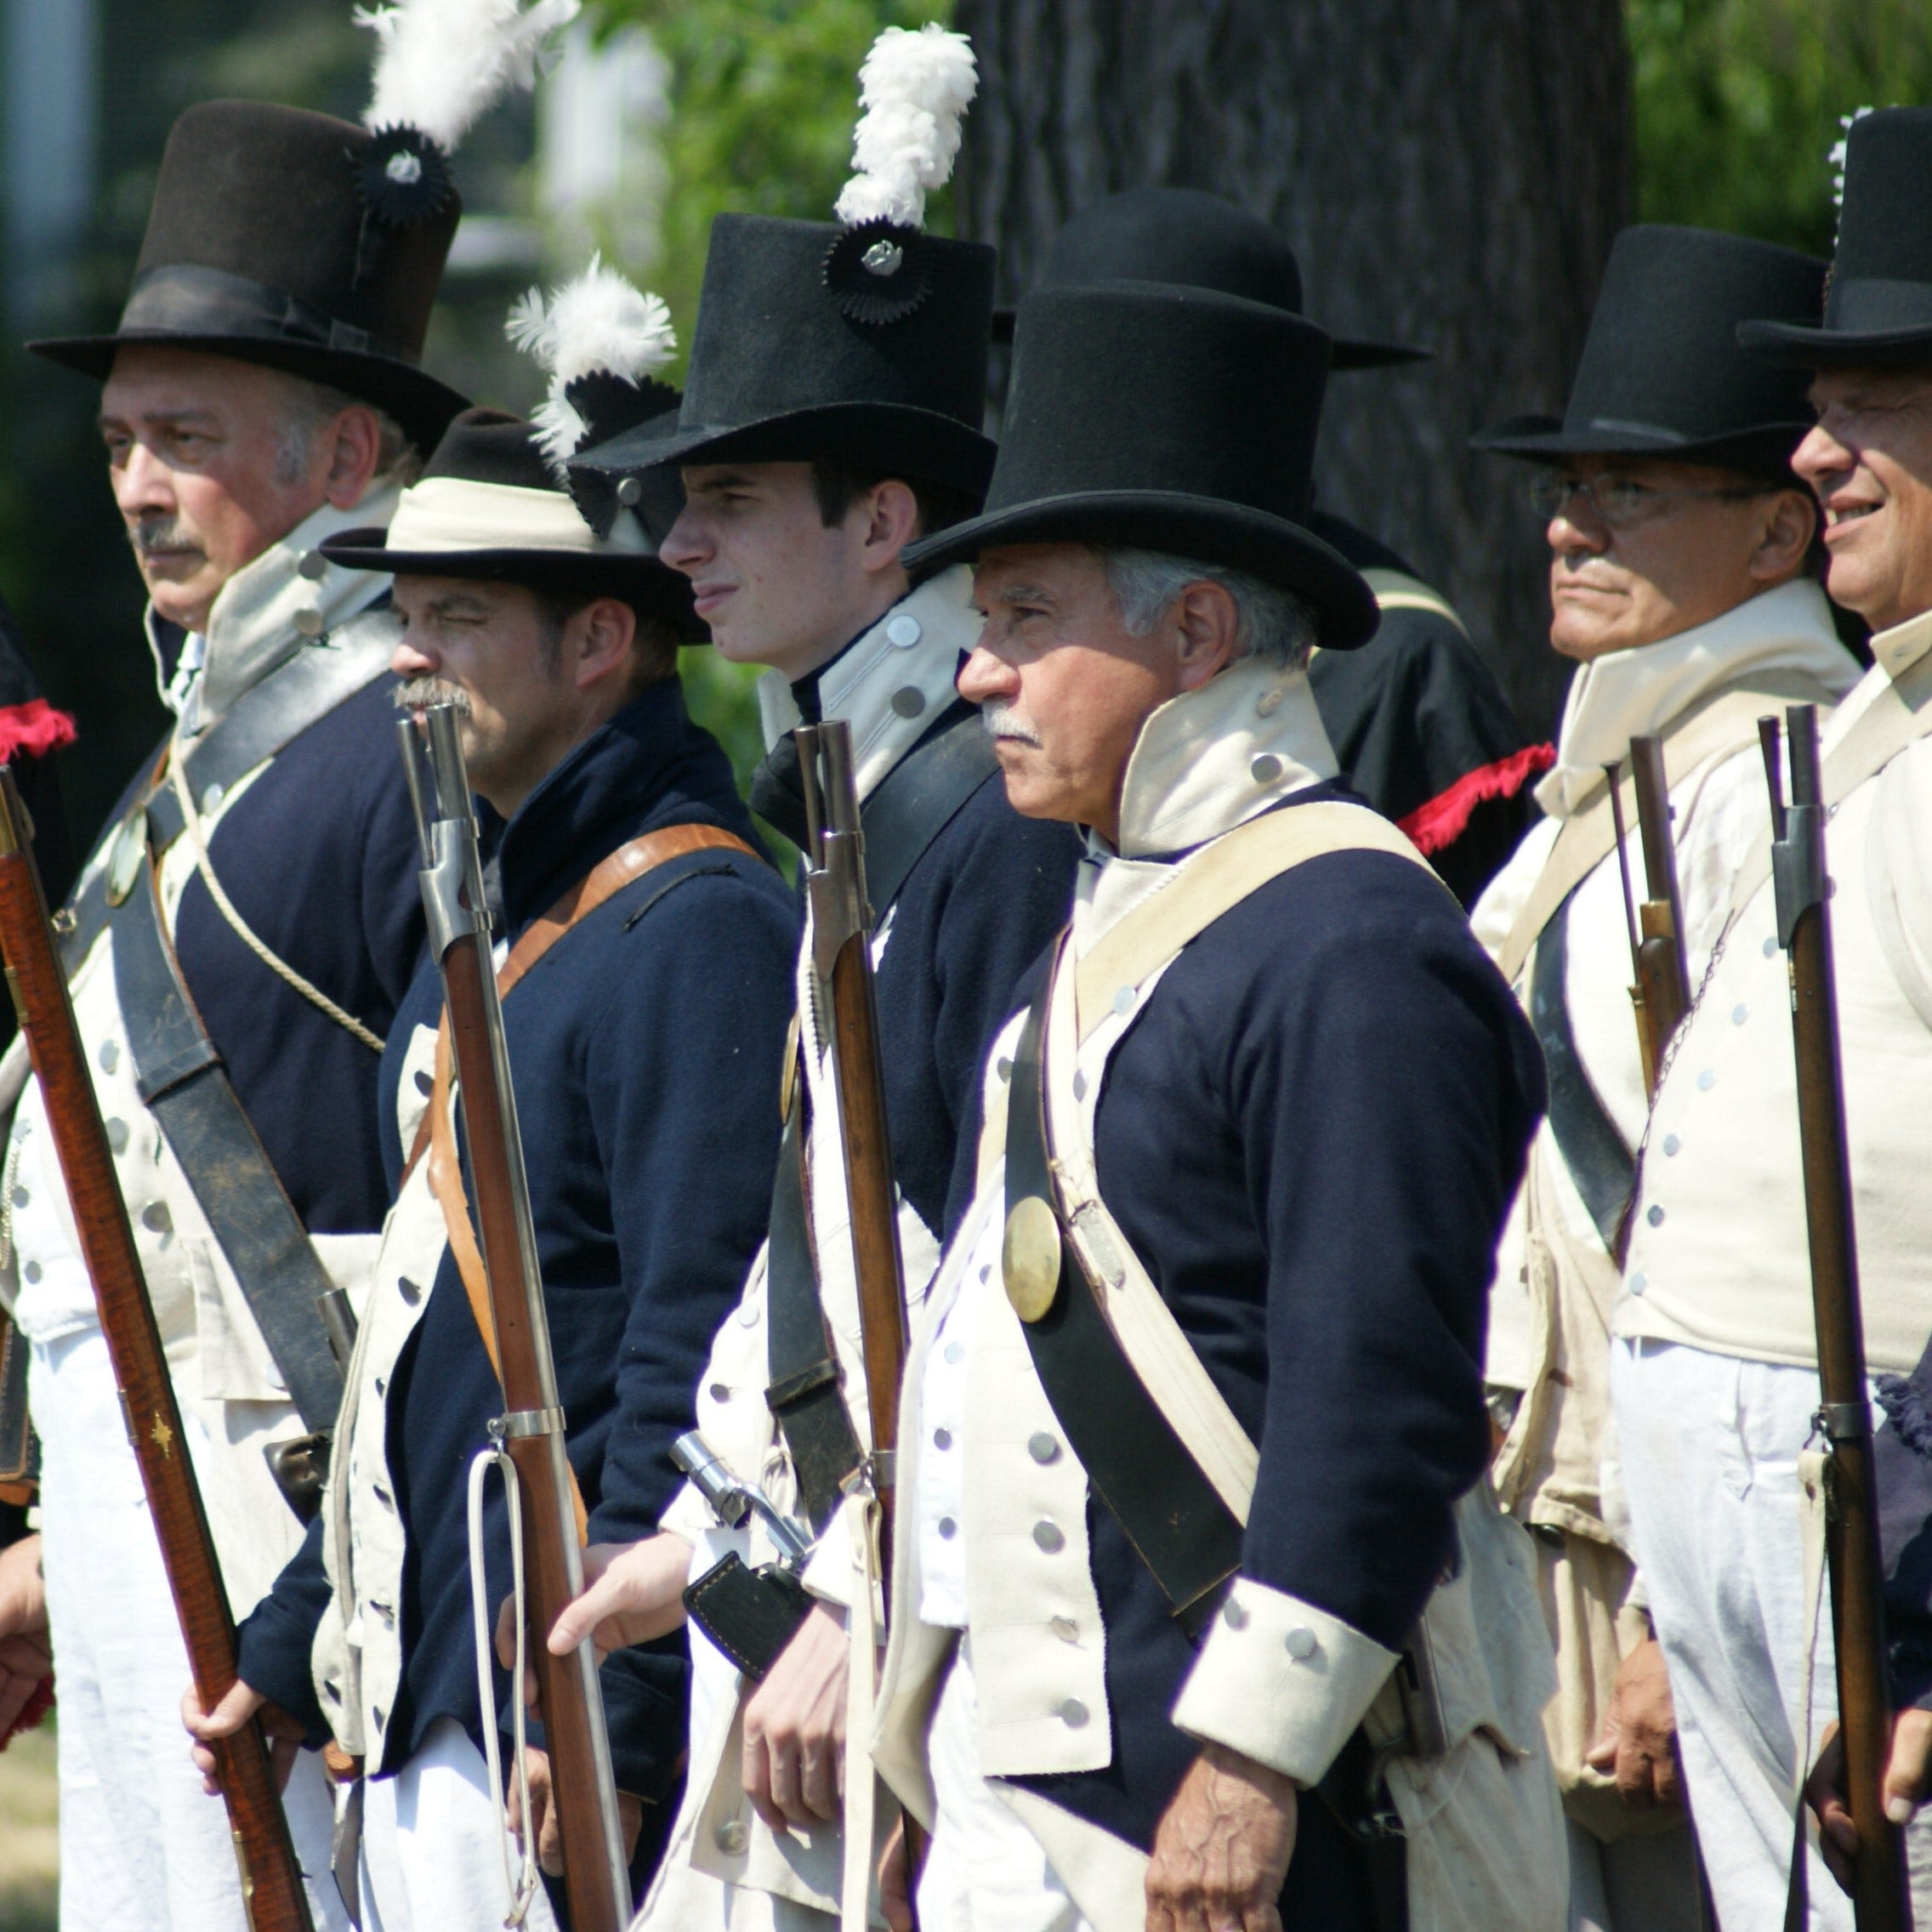 Annual Spring Muster scheduled for May 18 at River Raisin National Battlefield Park